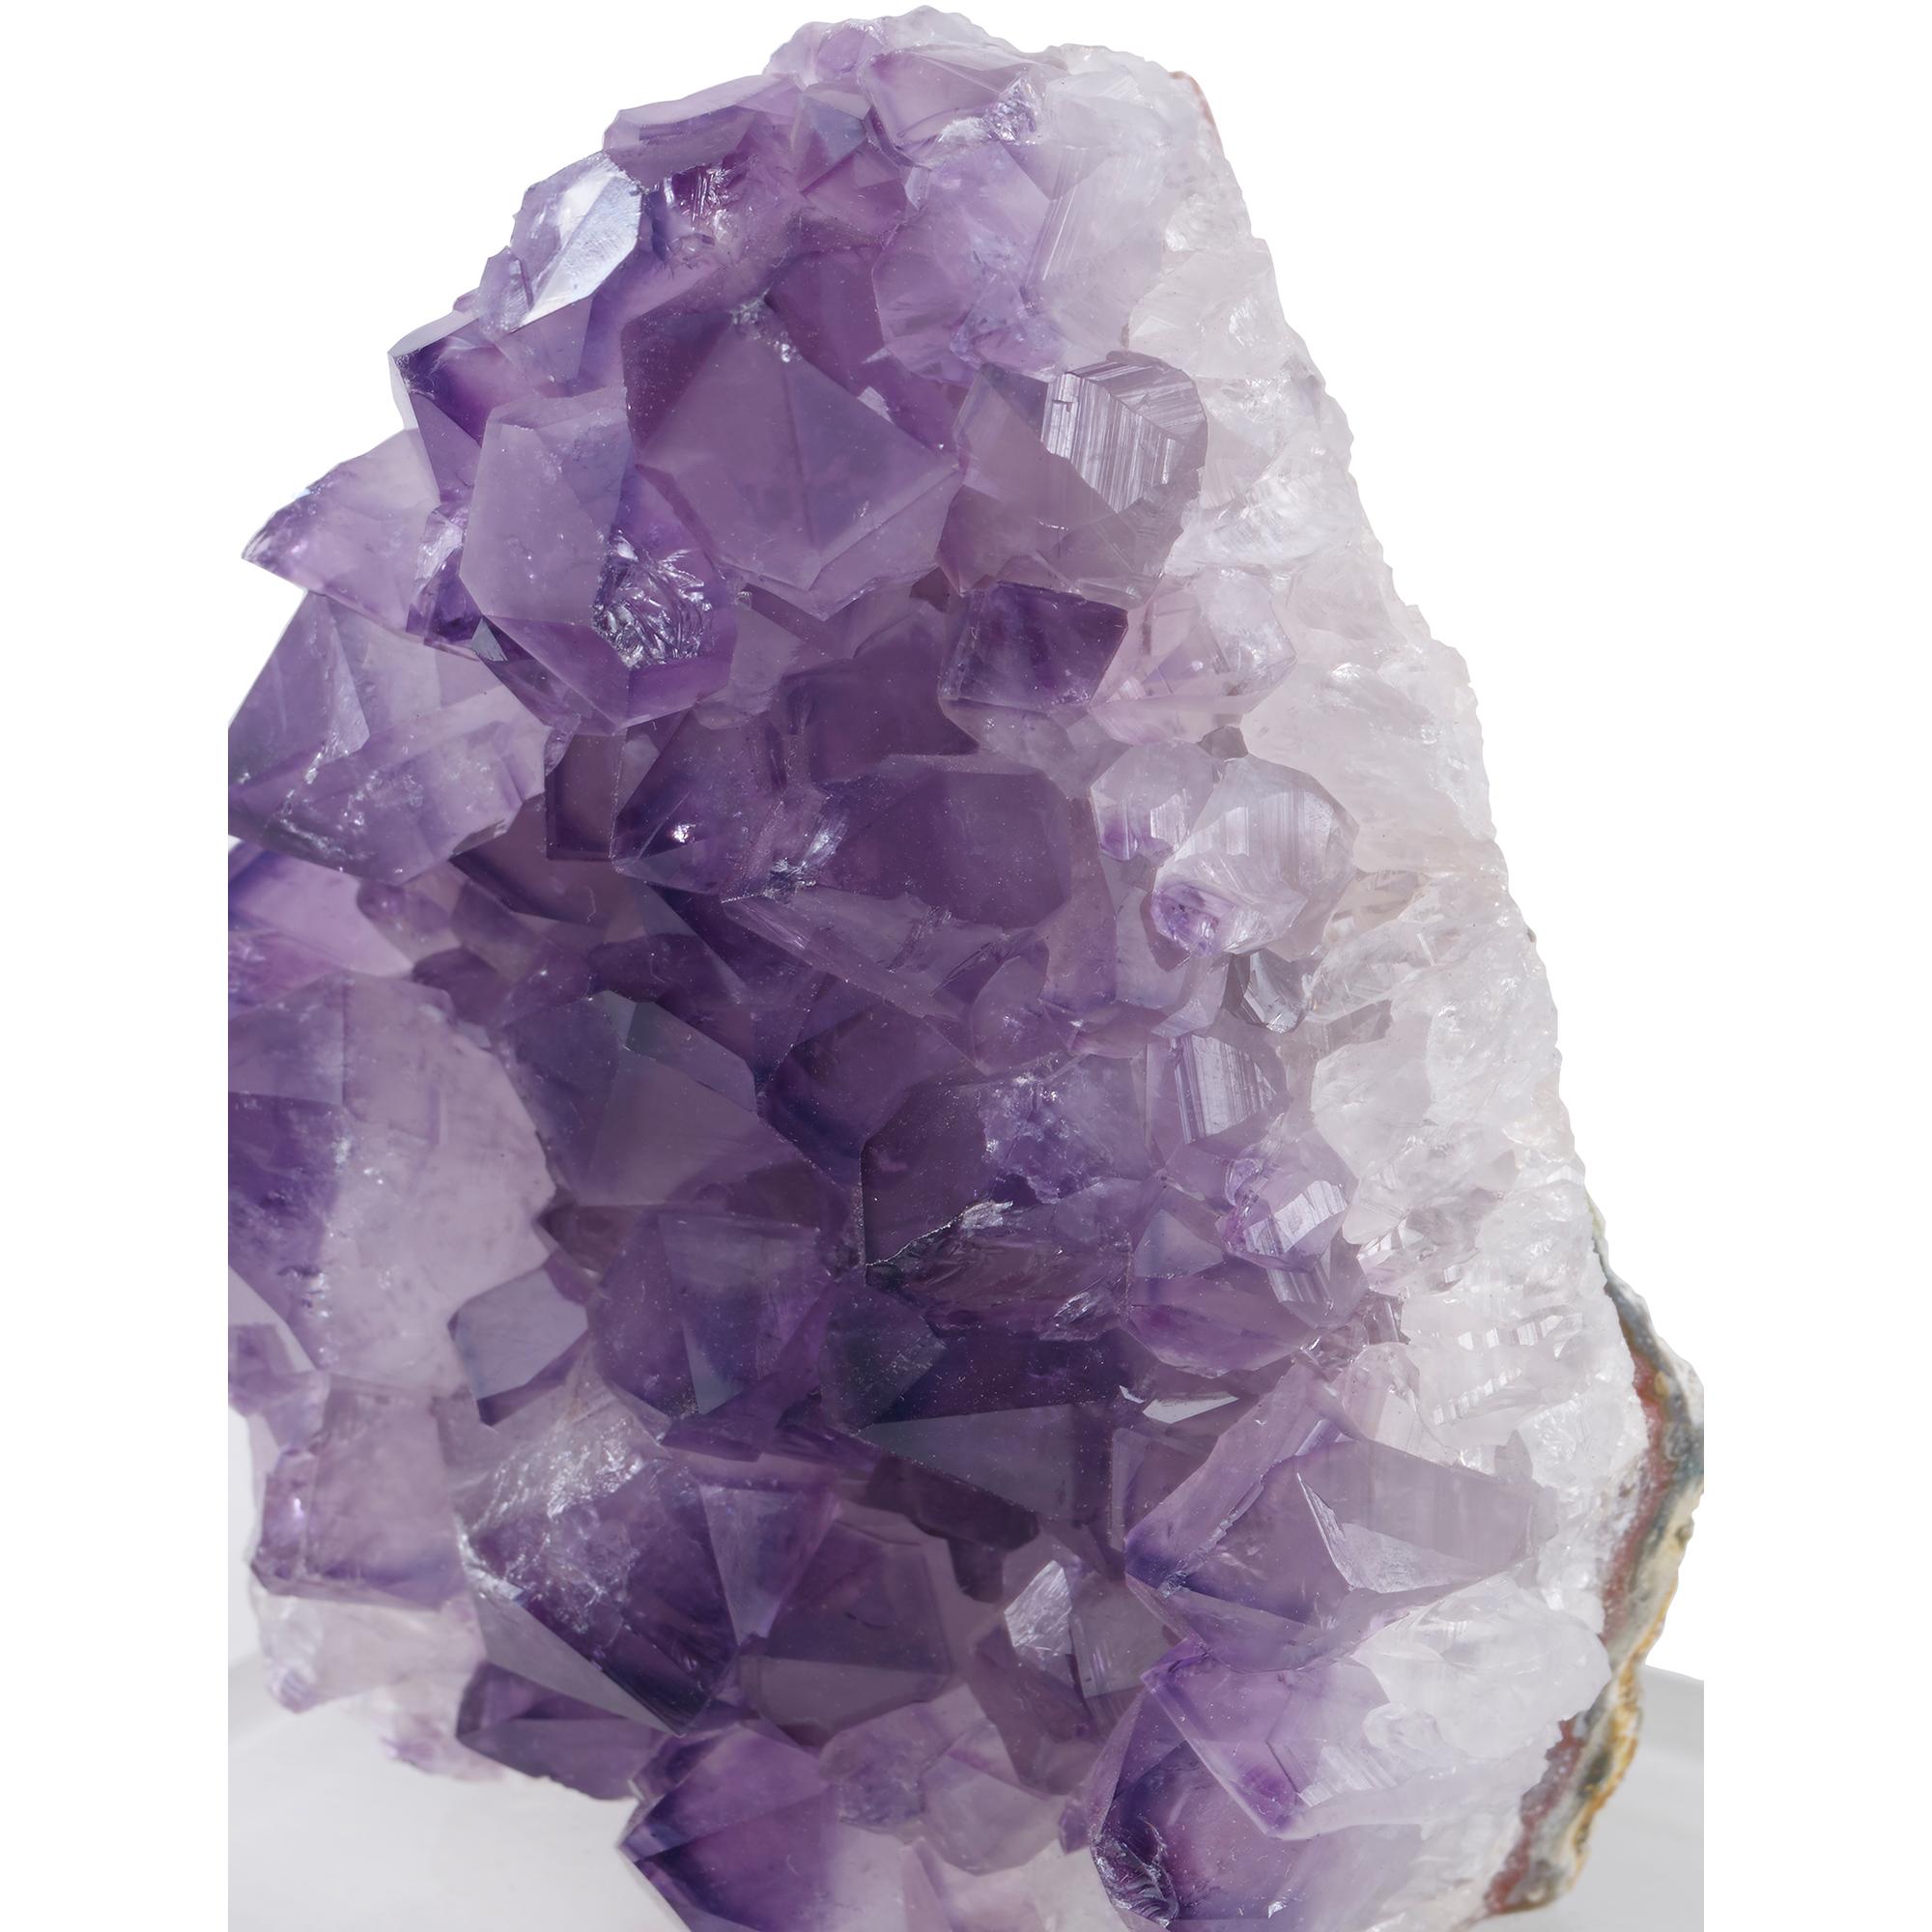 Contemporary Macapa Sculpture in Amethyst Stone by Curatedkravet